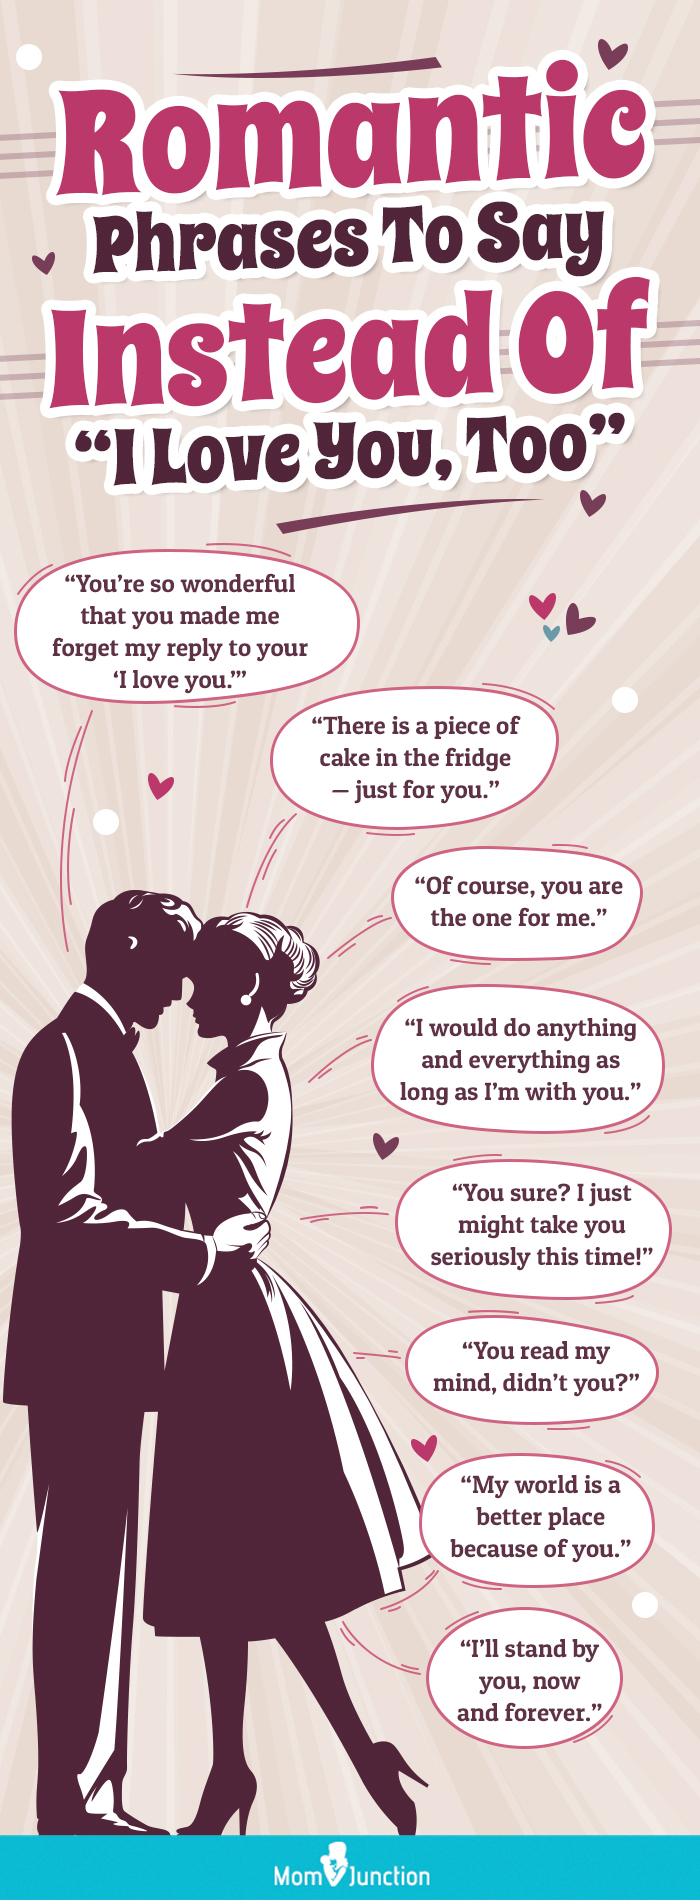 romantic phrases to say instead of i love you too (infographic)